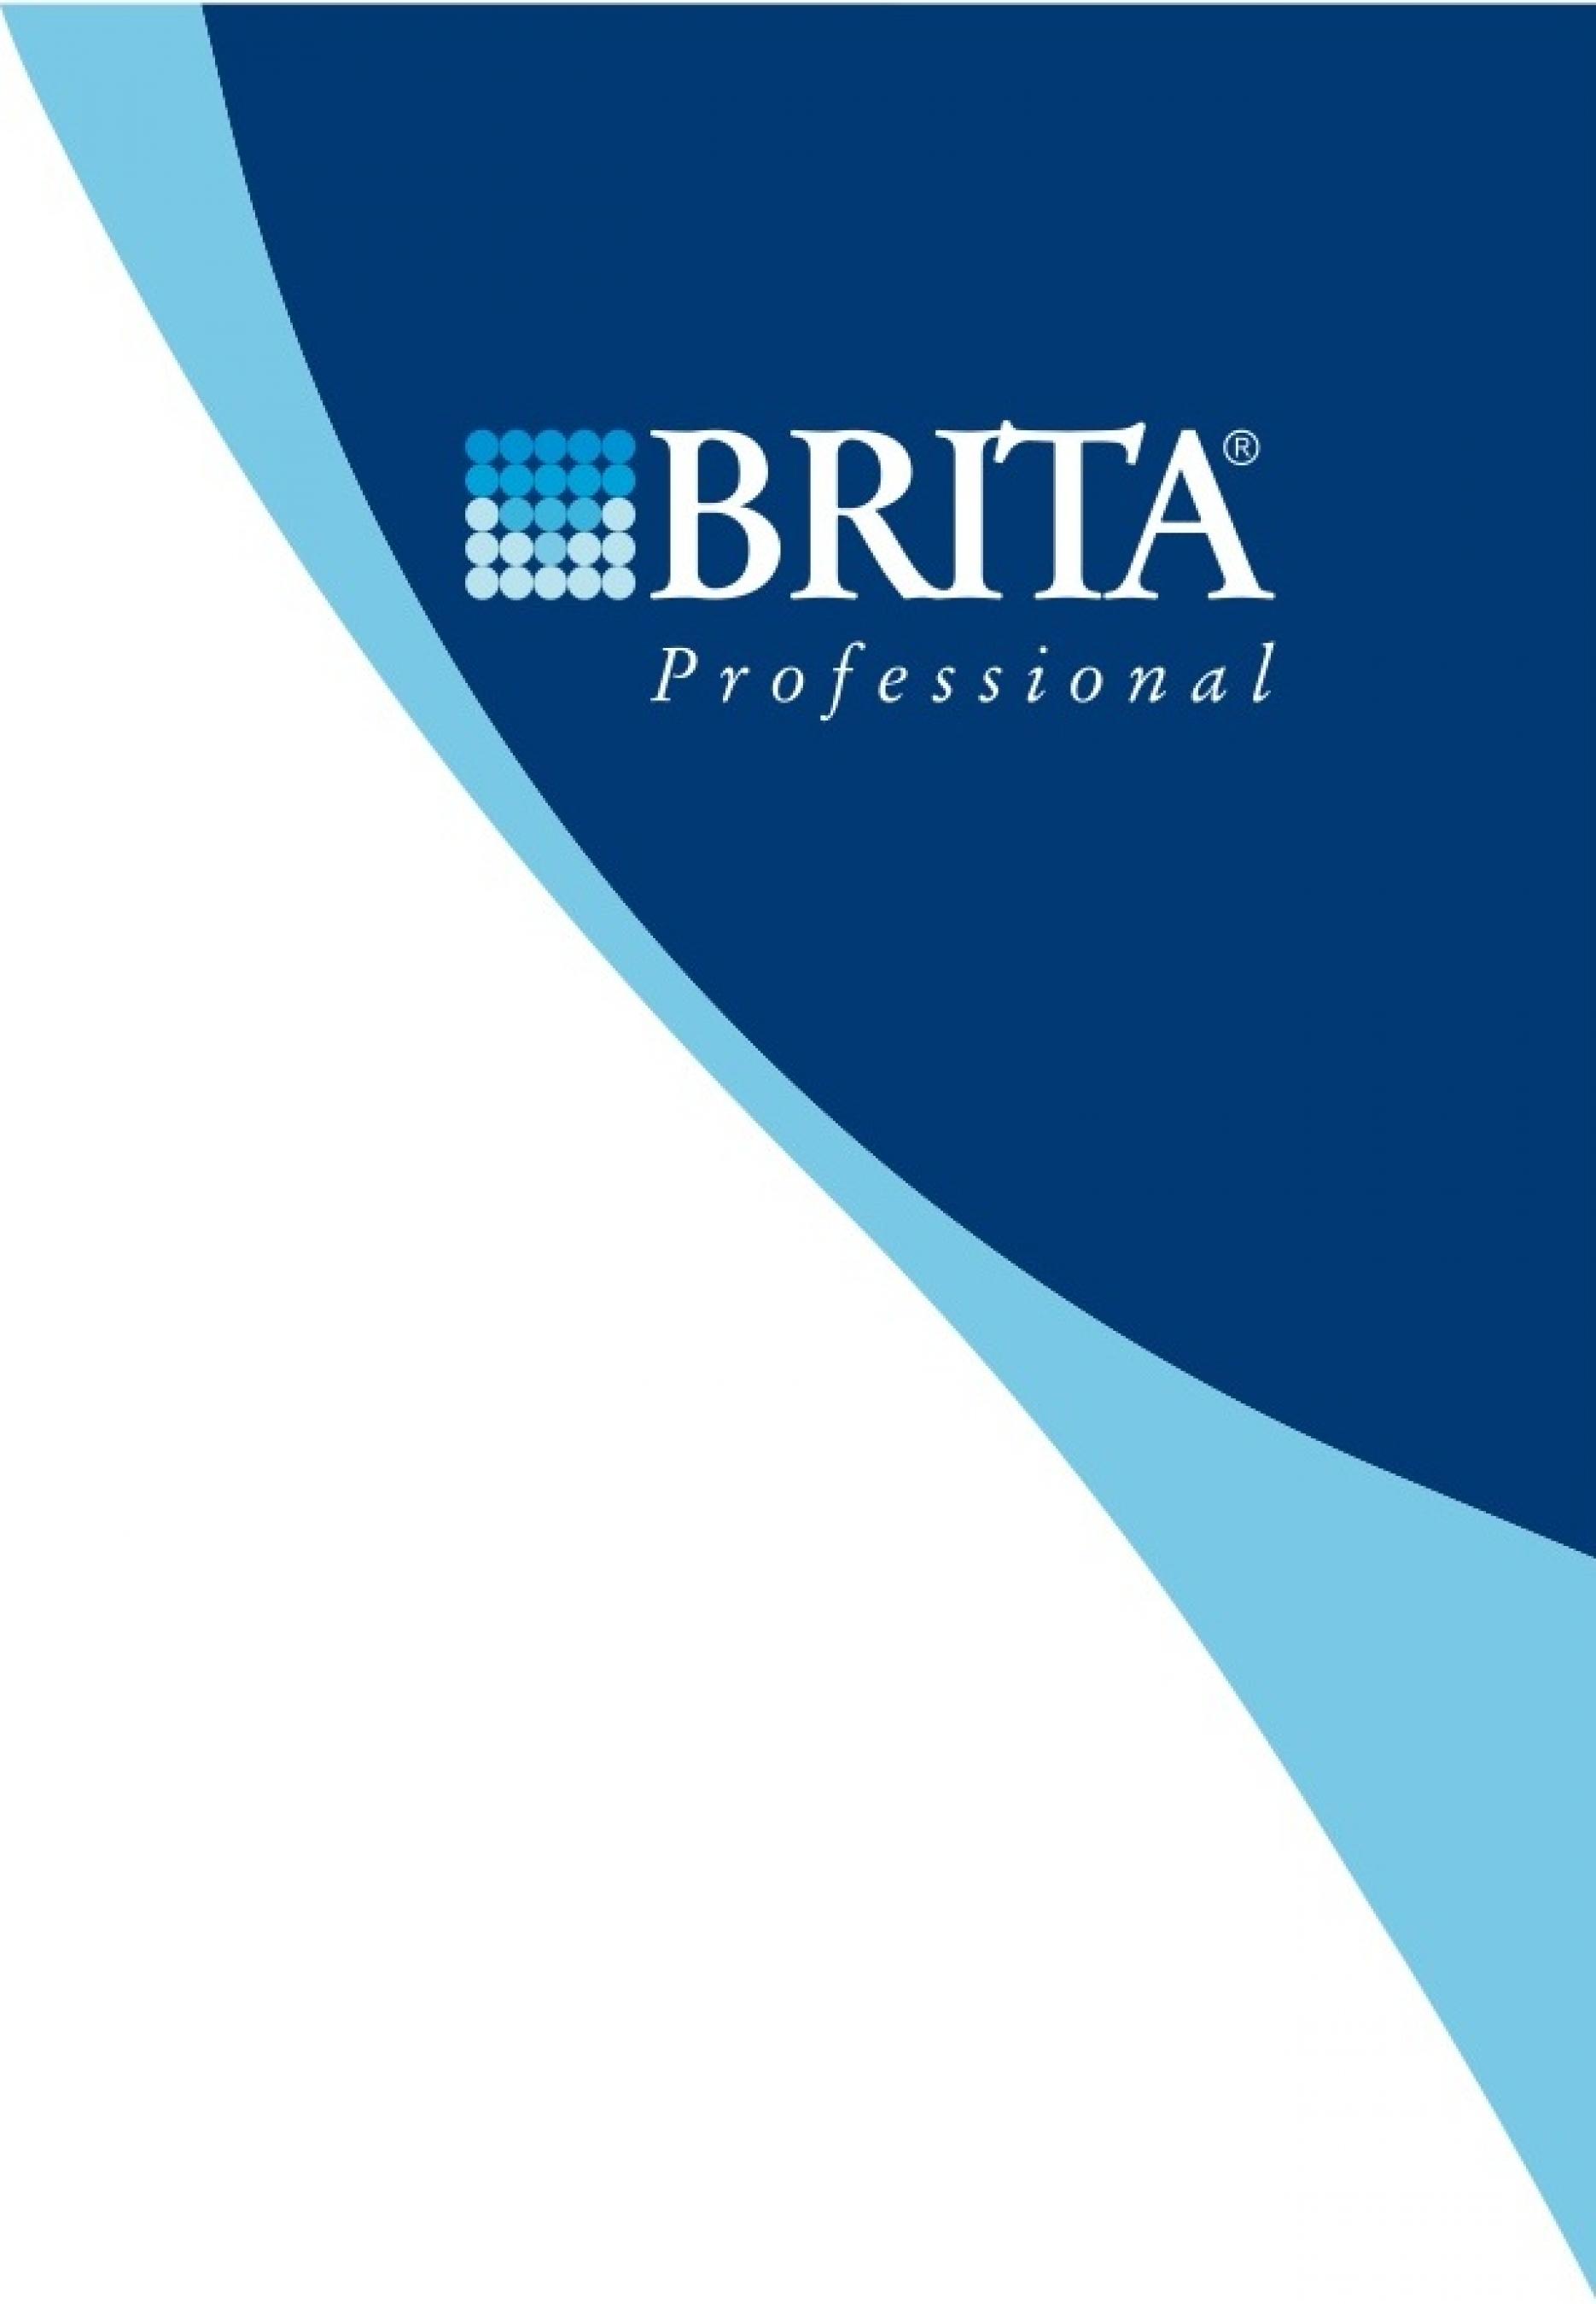 Brita Professional supports Hospitality Action charity